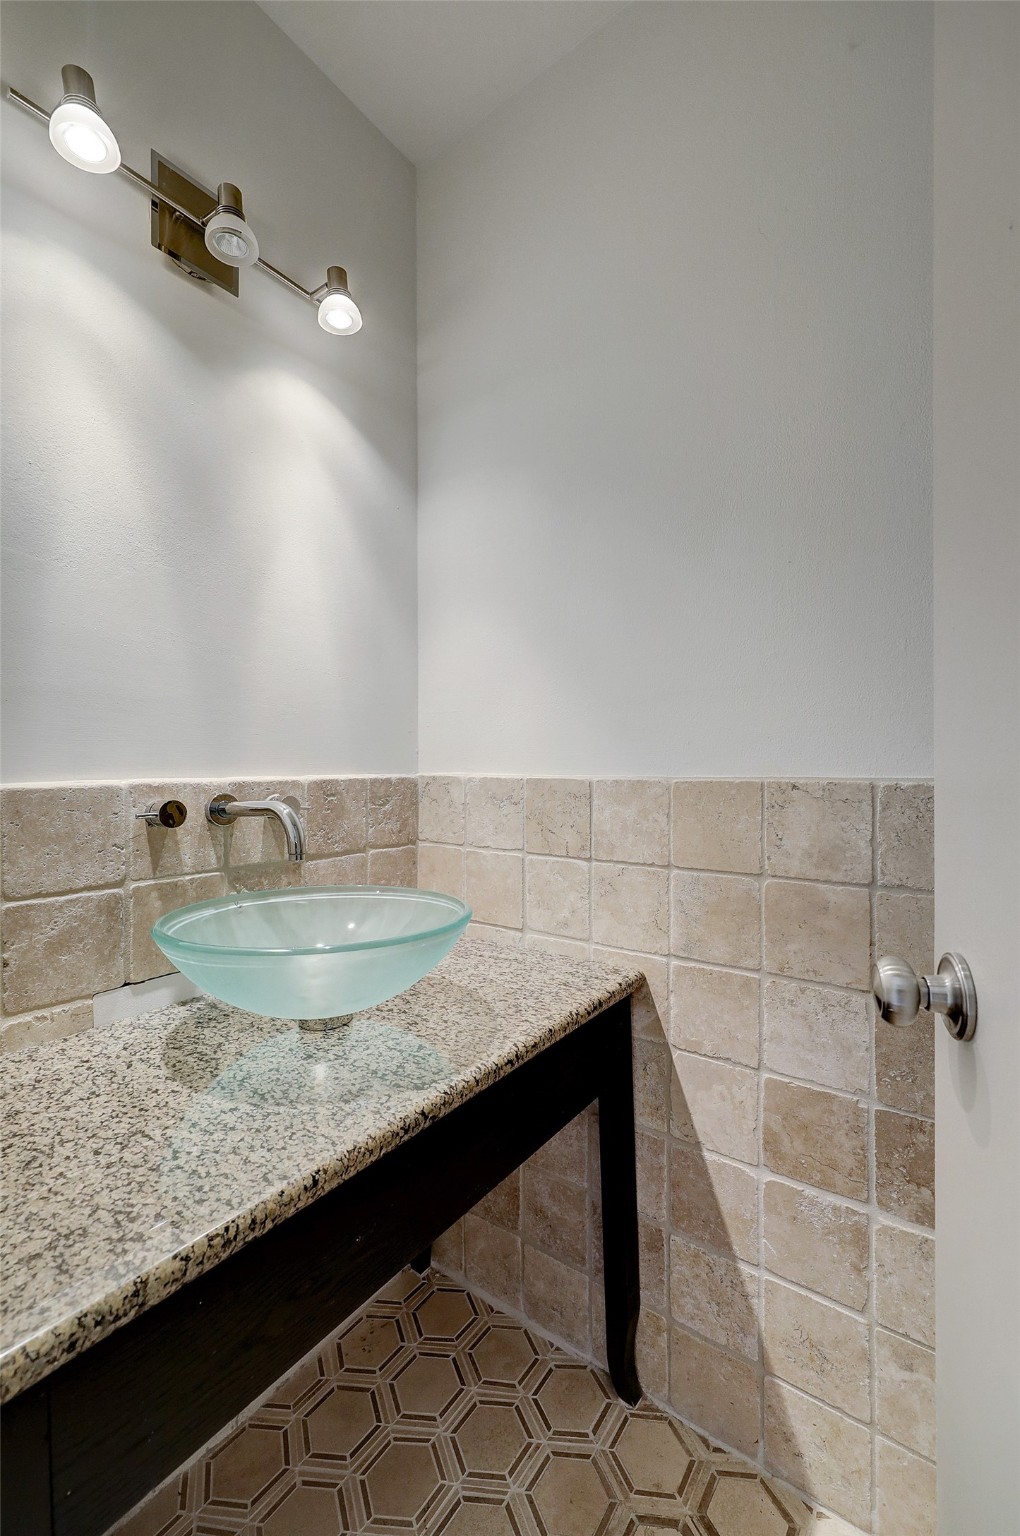 The powder bathroom is tucked away from view, but easily accessible to residents and guests. Granite countertops and a vessel sink are complimented by hexagon tile flooring.